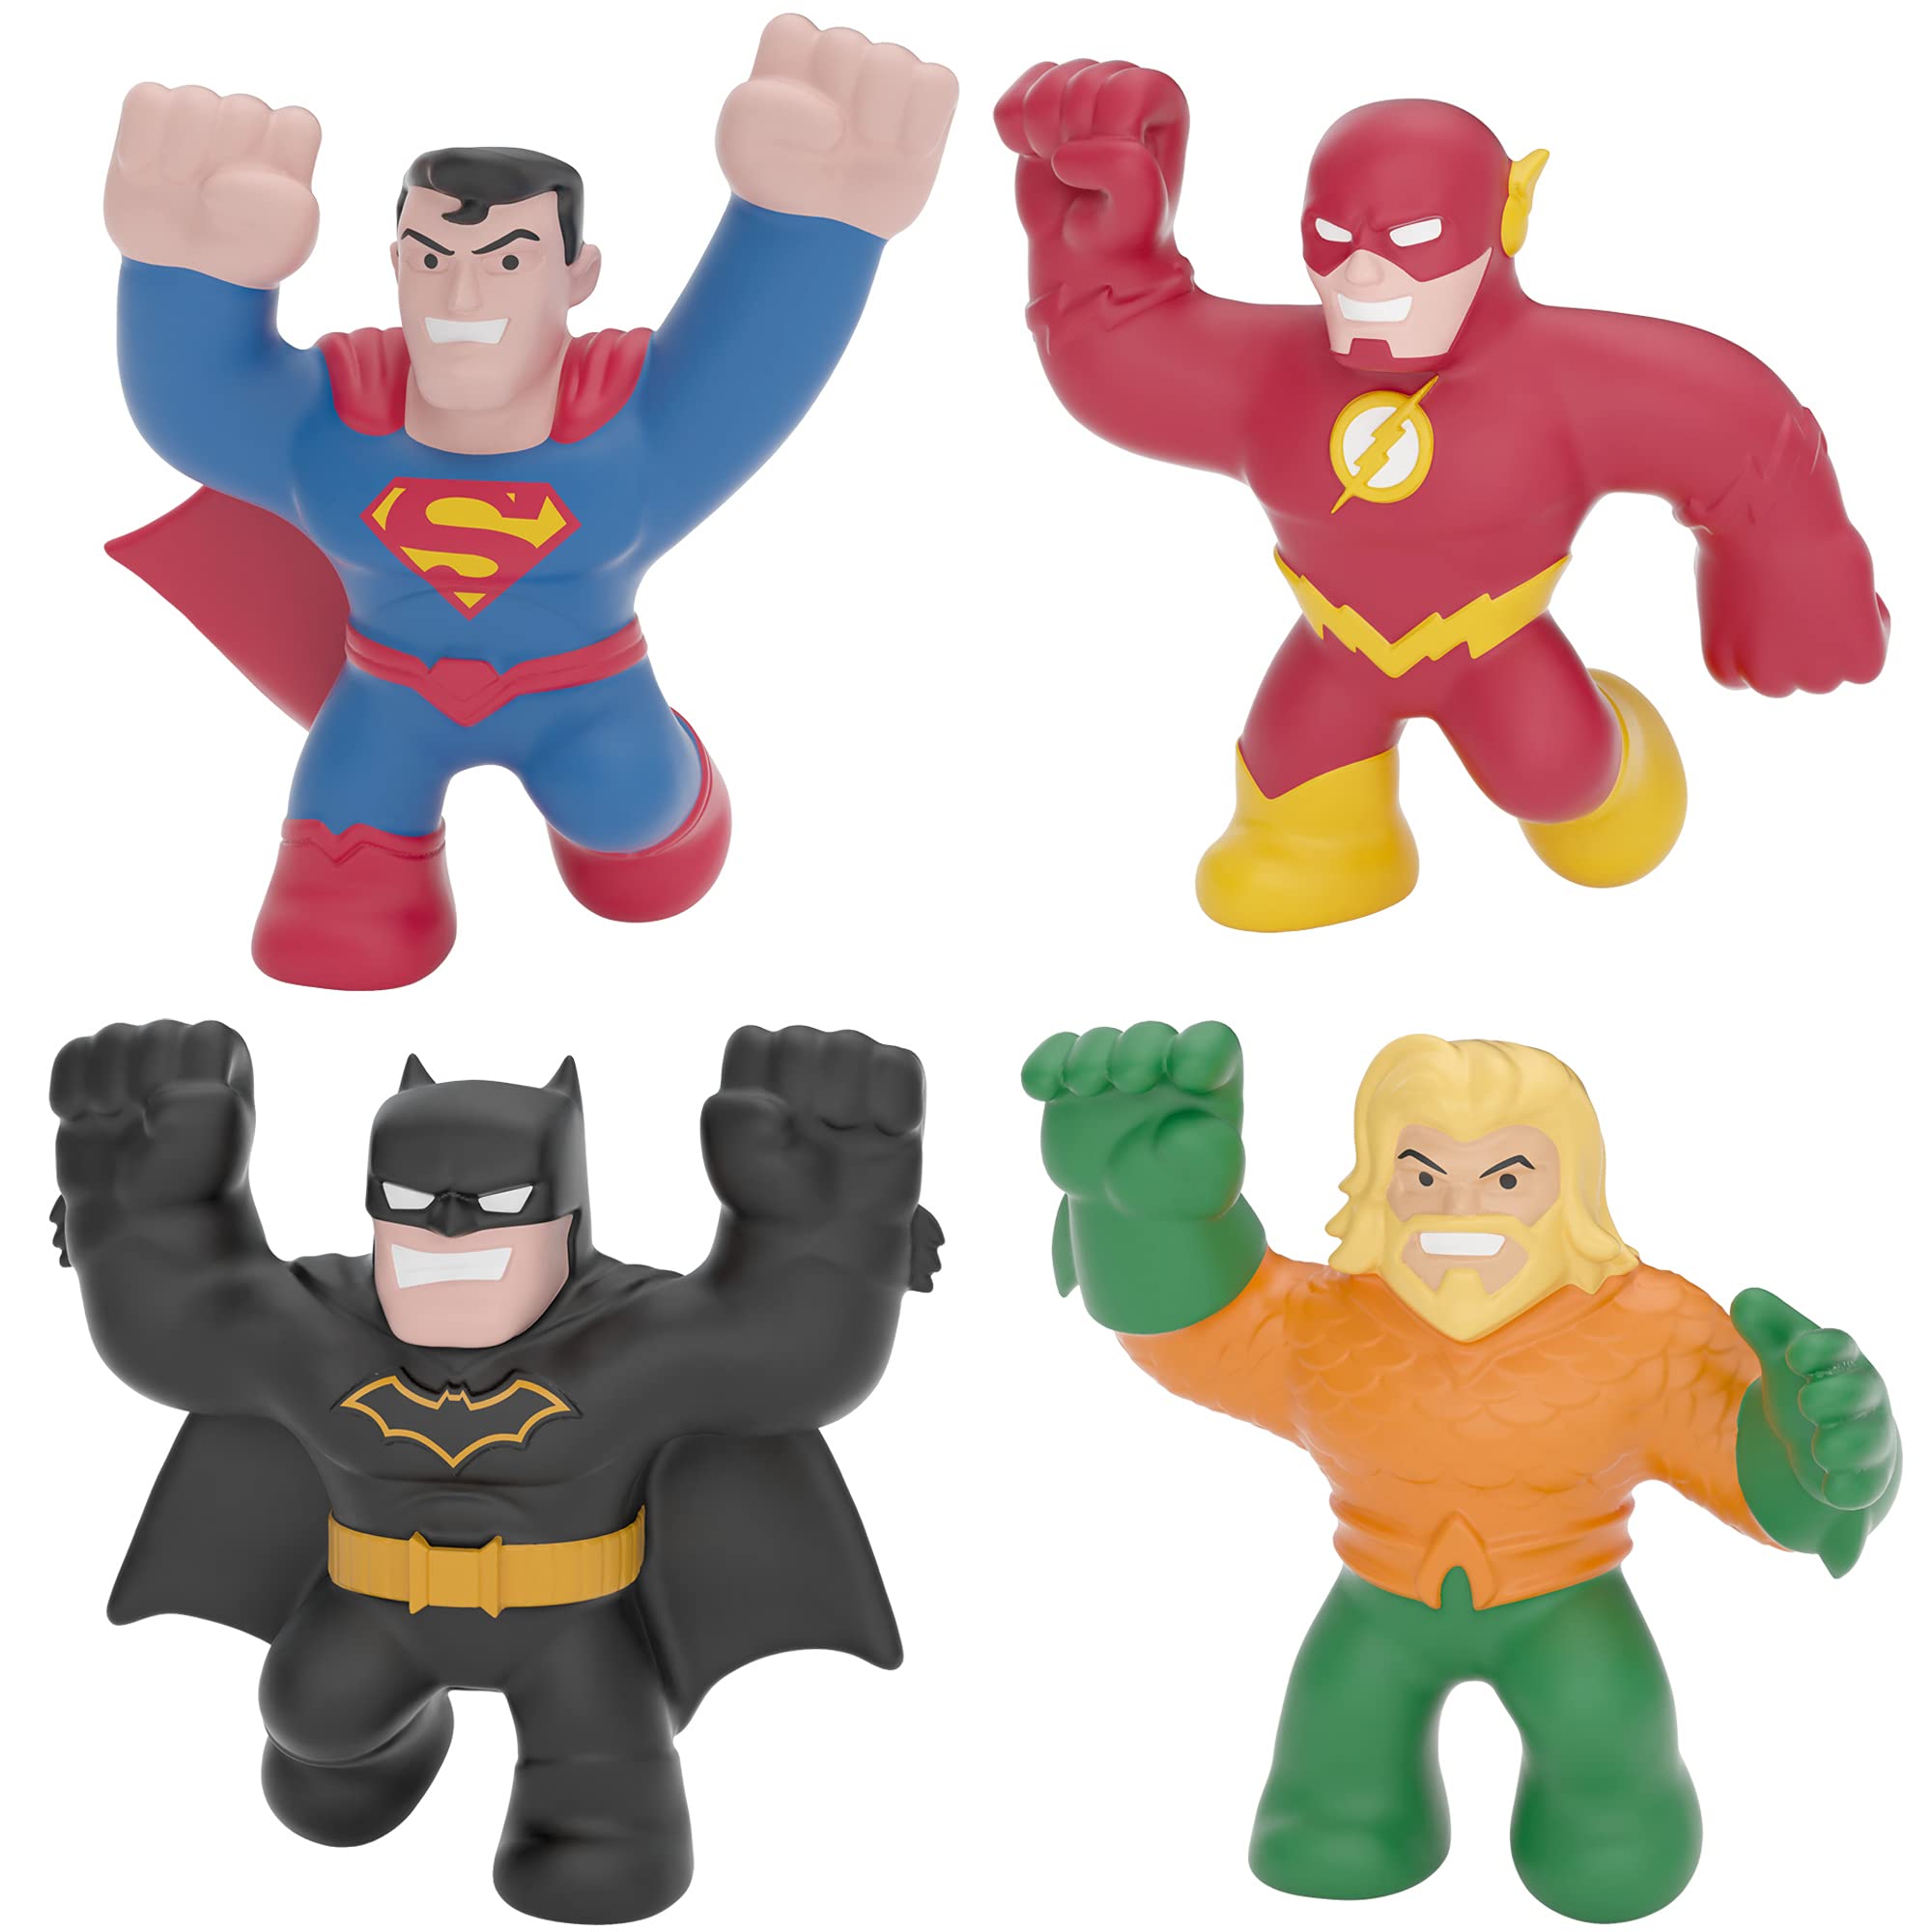 4-Pack 4.5" Heroes of Goo Jit Zu DC Superhero Stretchy & Squishy Action Figures (Aquaman, Batman, Superman, The Flash) $13.45 ($3.36 each) + Free Shipping w/ Prime or on $25+